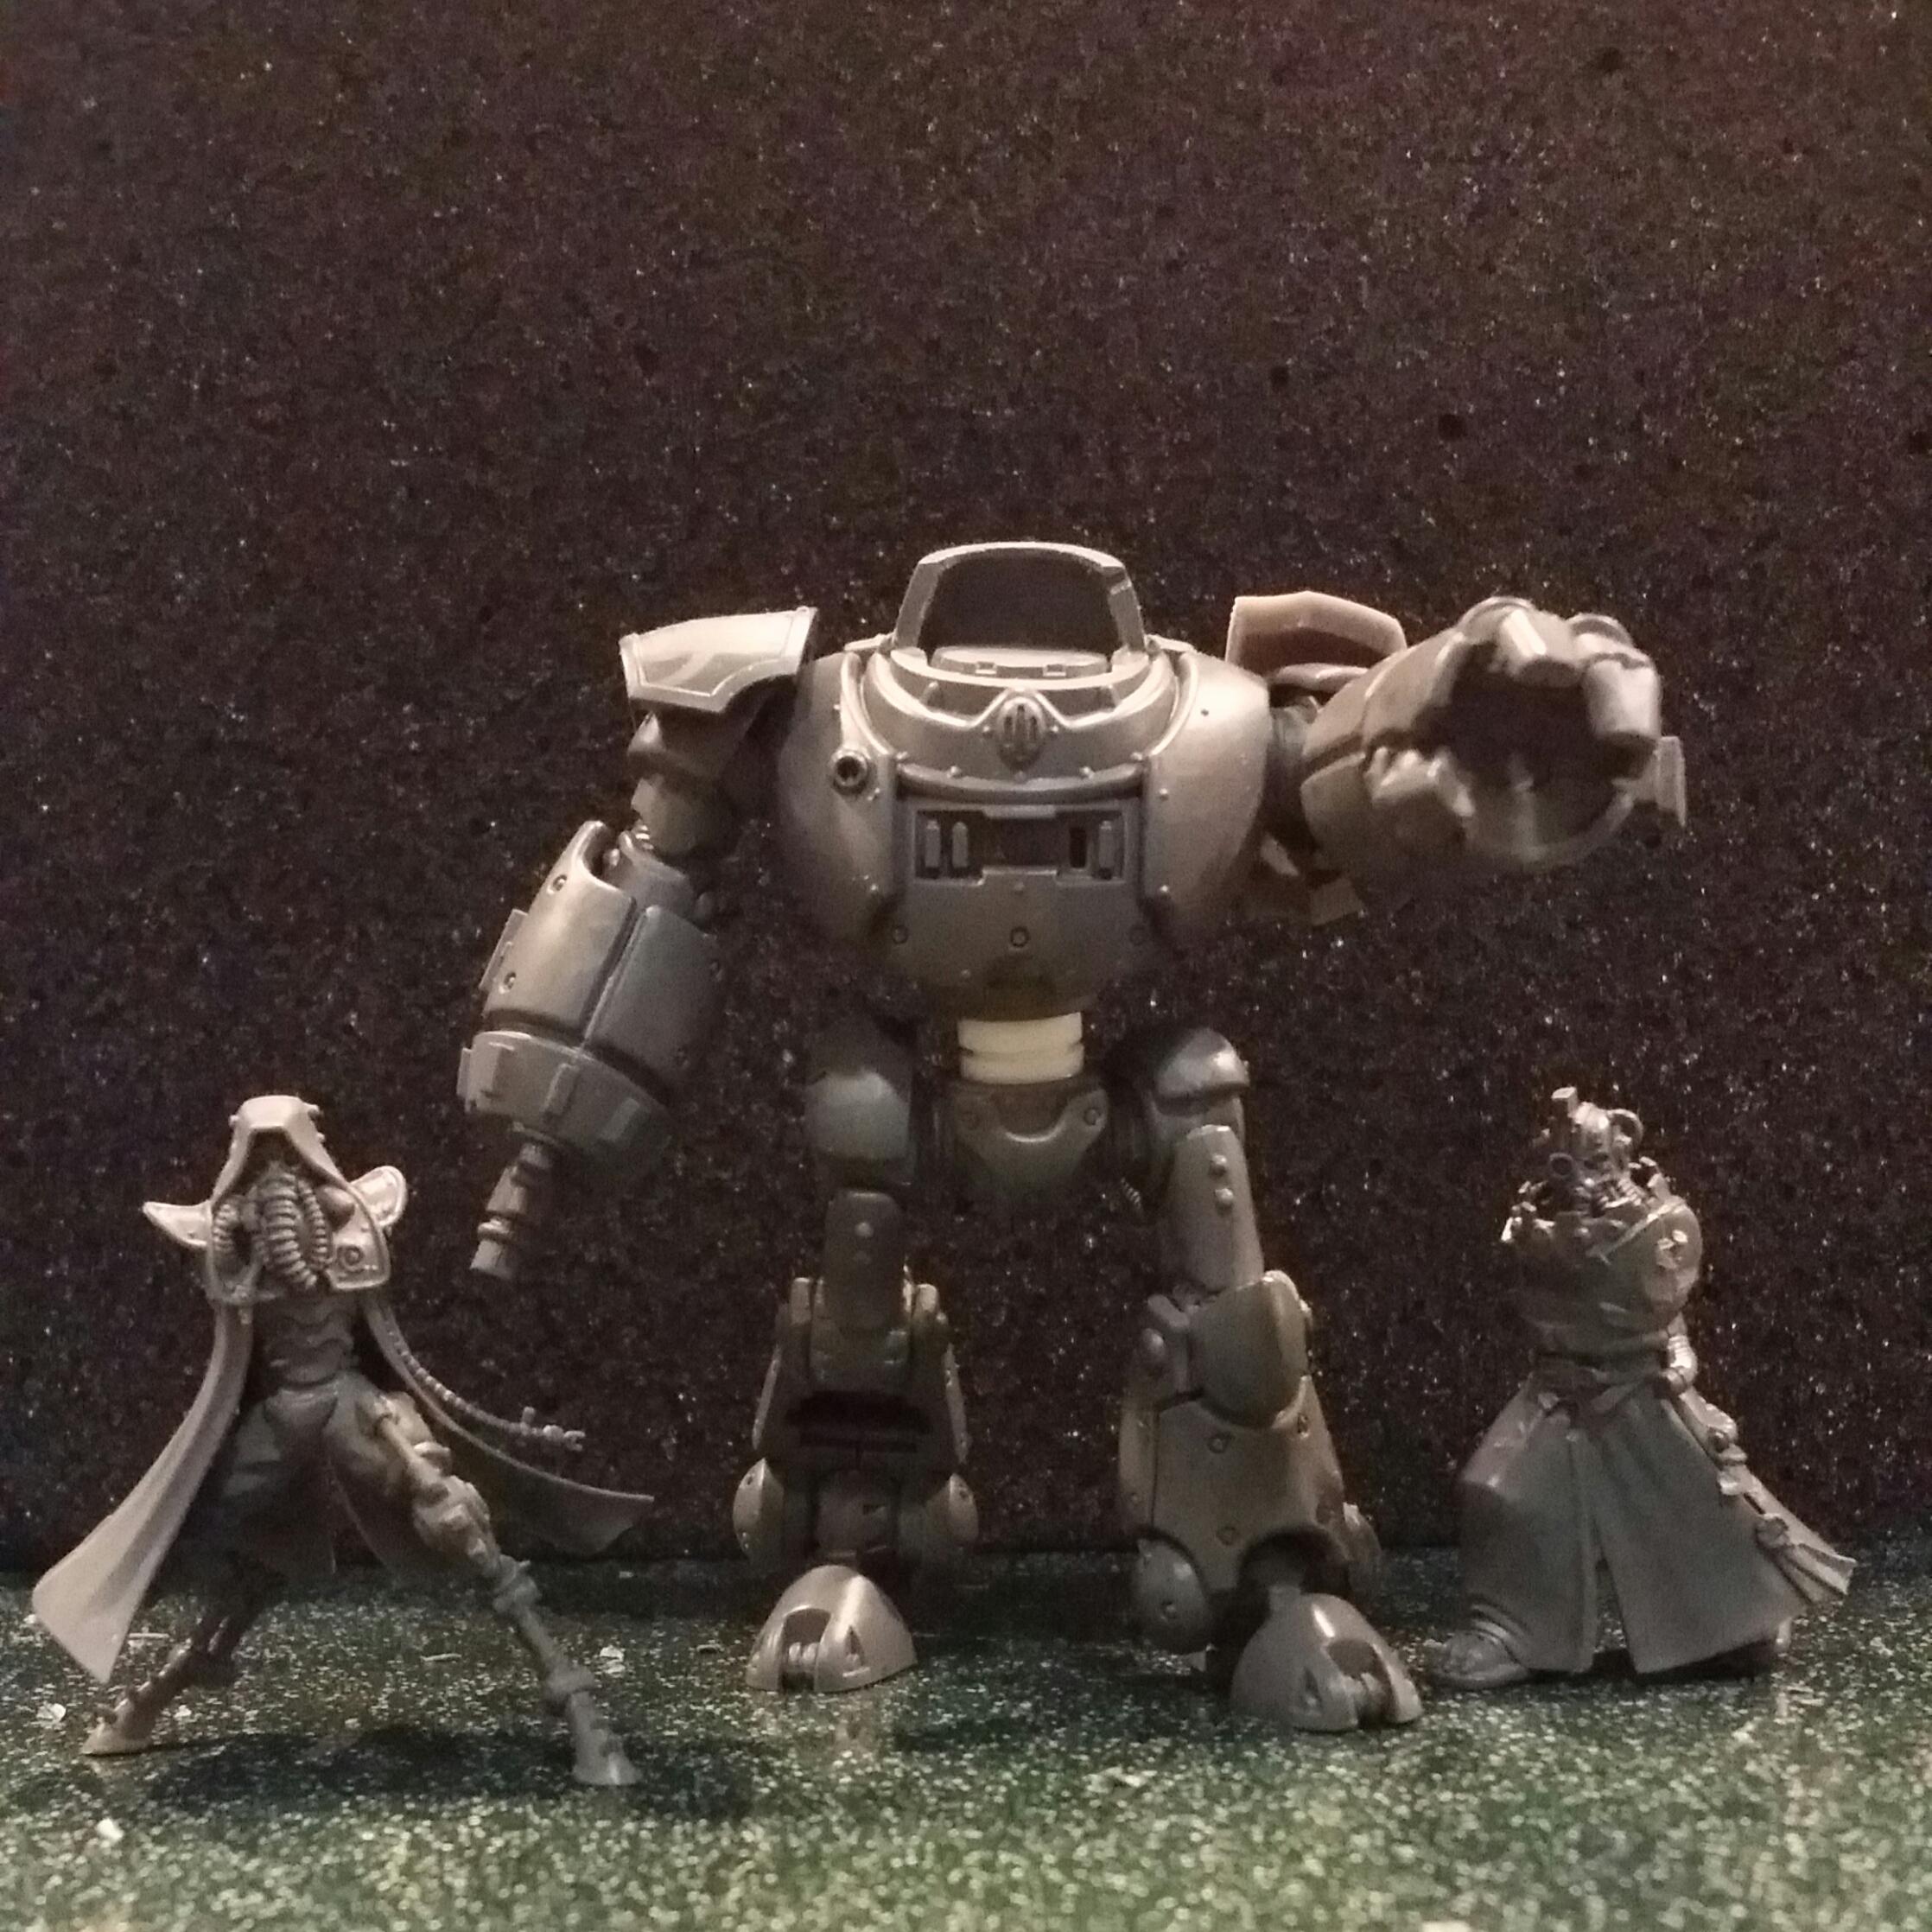 Kastelan with others models for size comparison